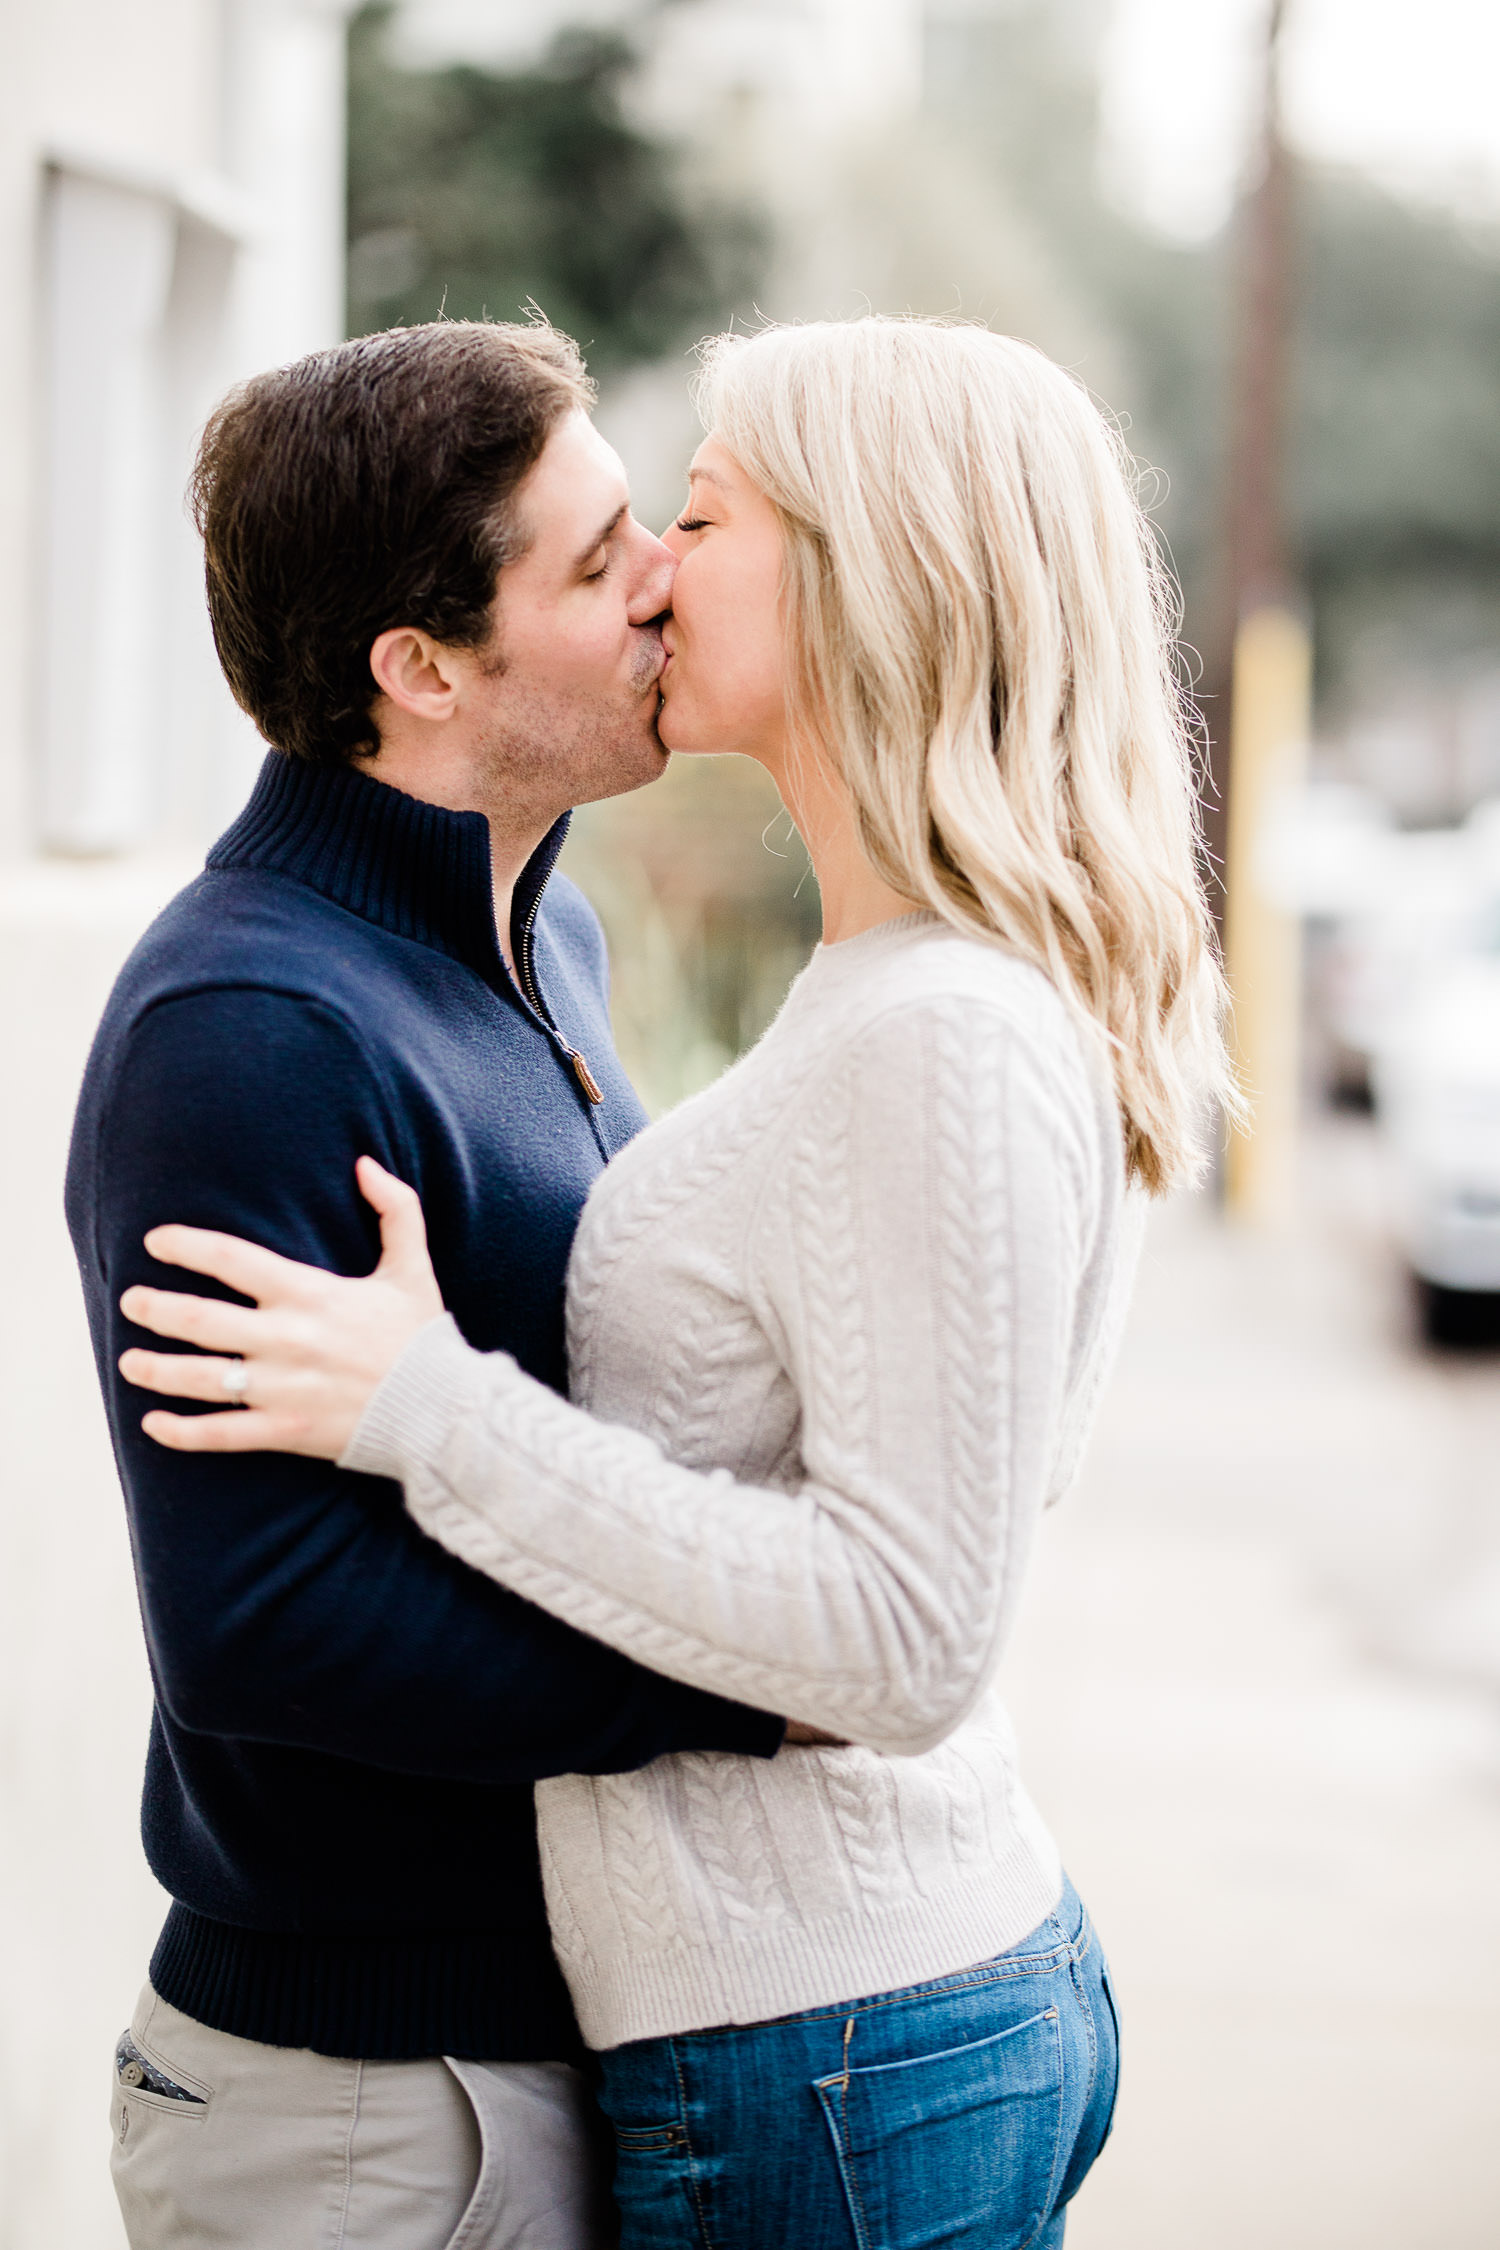 Alex + Drew // Engagement Session in Downtown Charleston